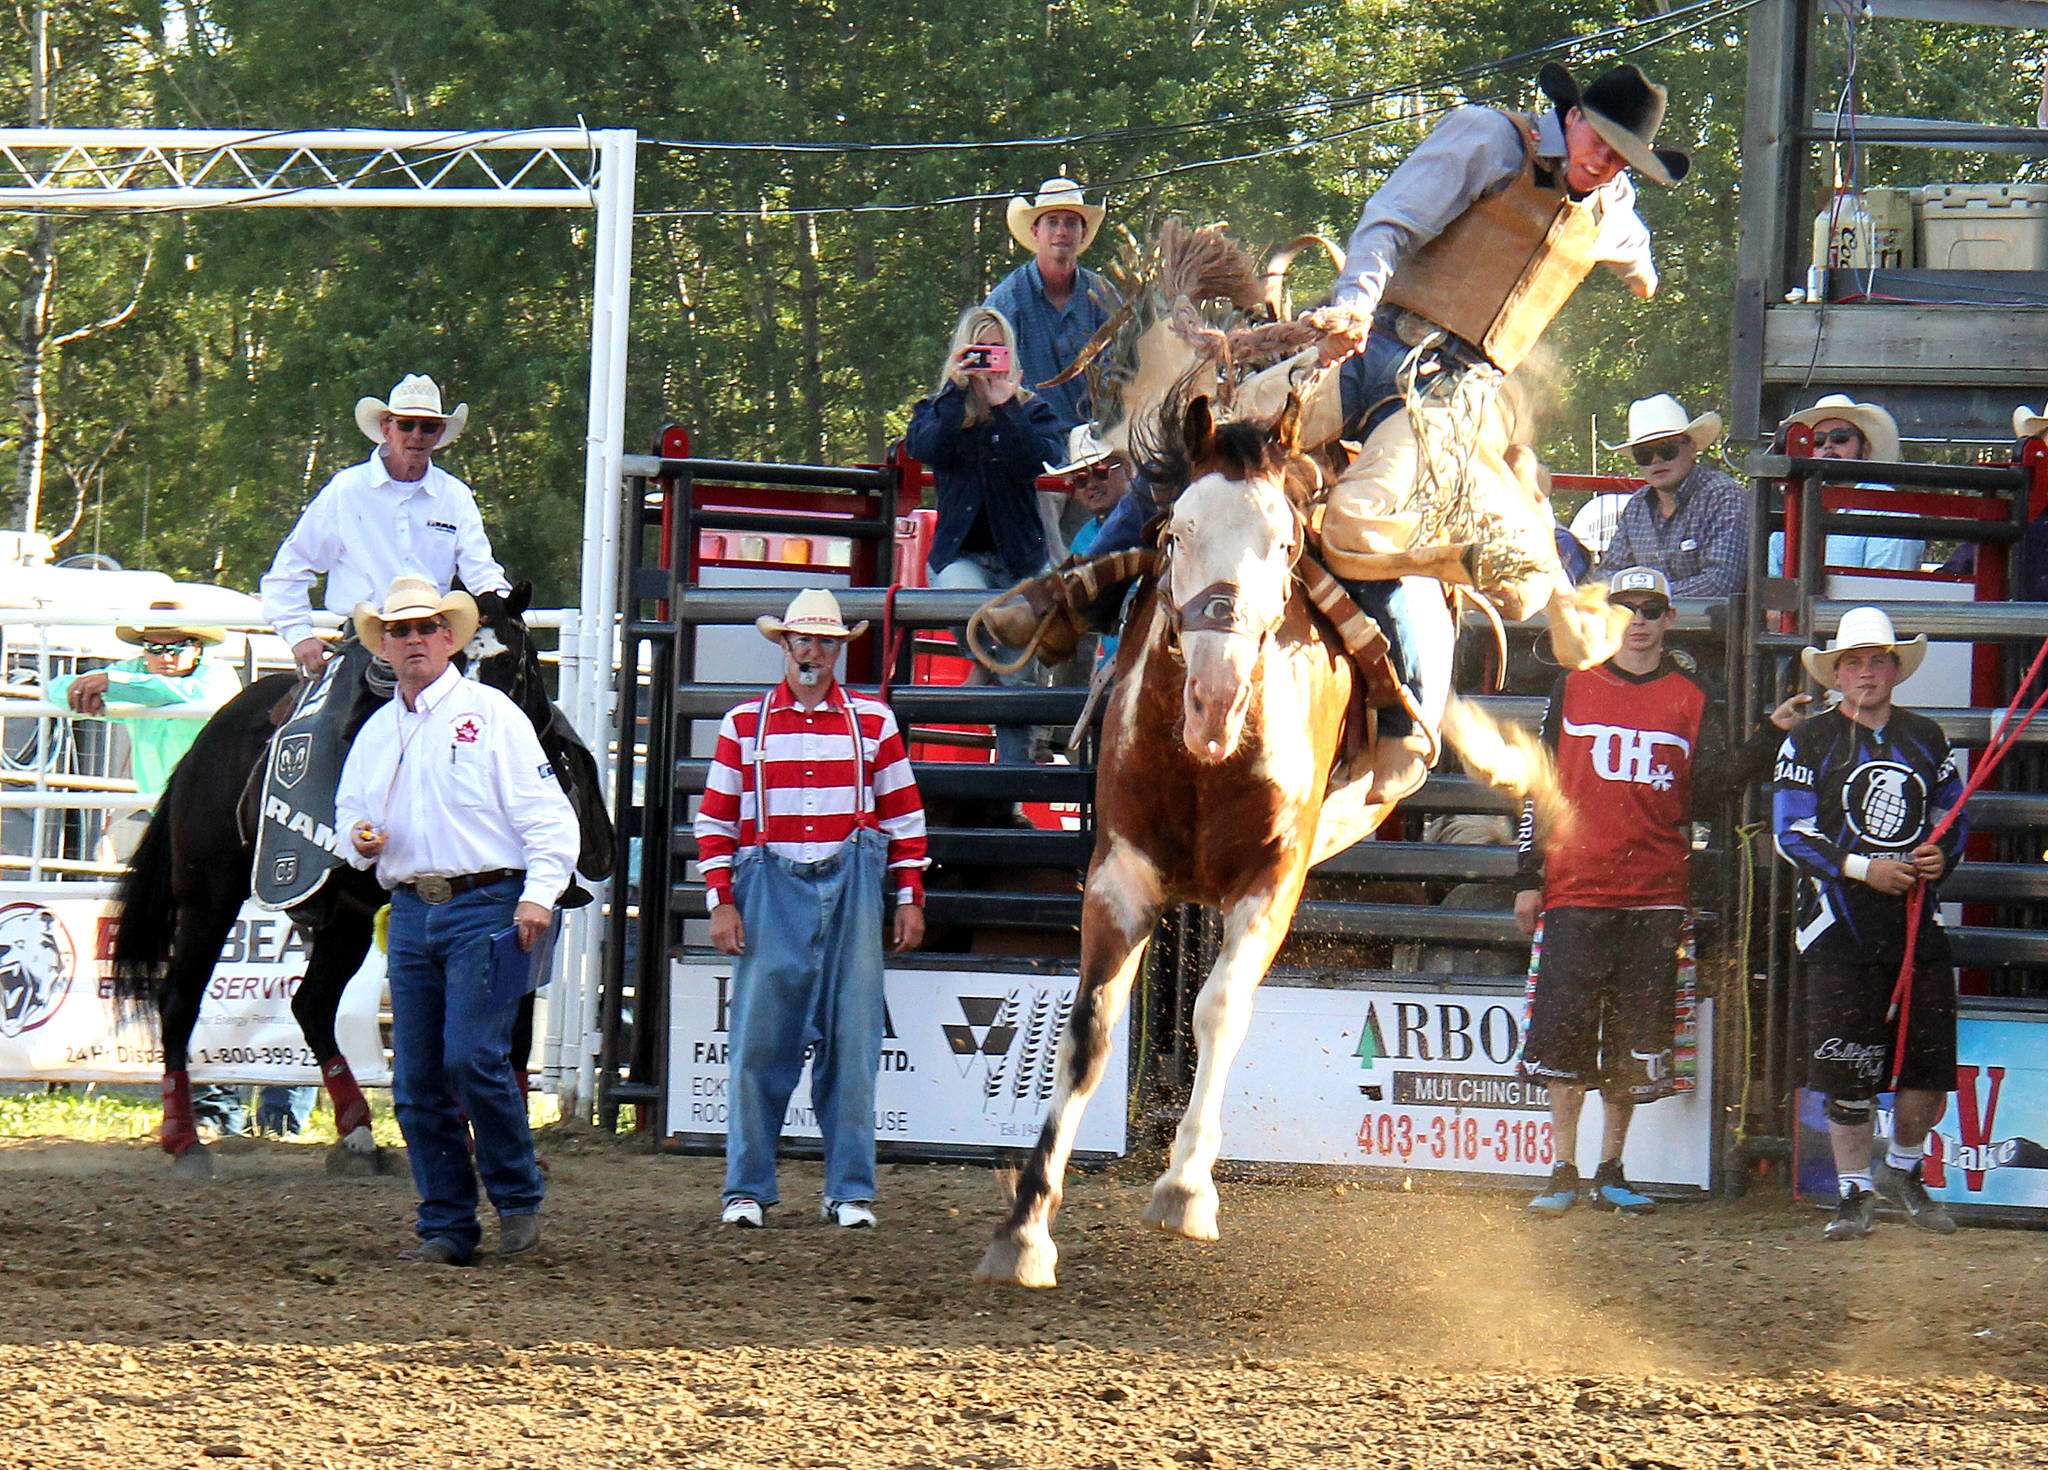 Jake Burwash hangs on for as long as he can during the novice saddle bronc event at the Benalto Stampede July 5-8. Photo by Megan Roth/Sylvan Lake News